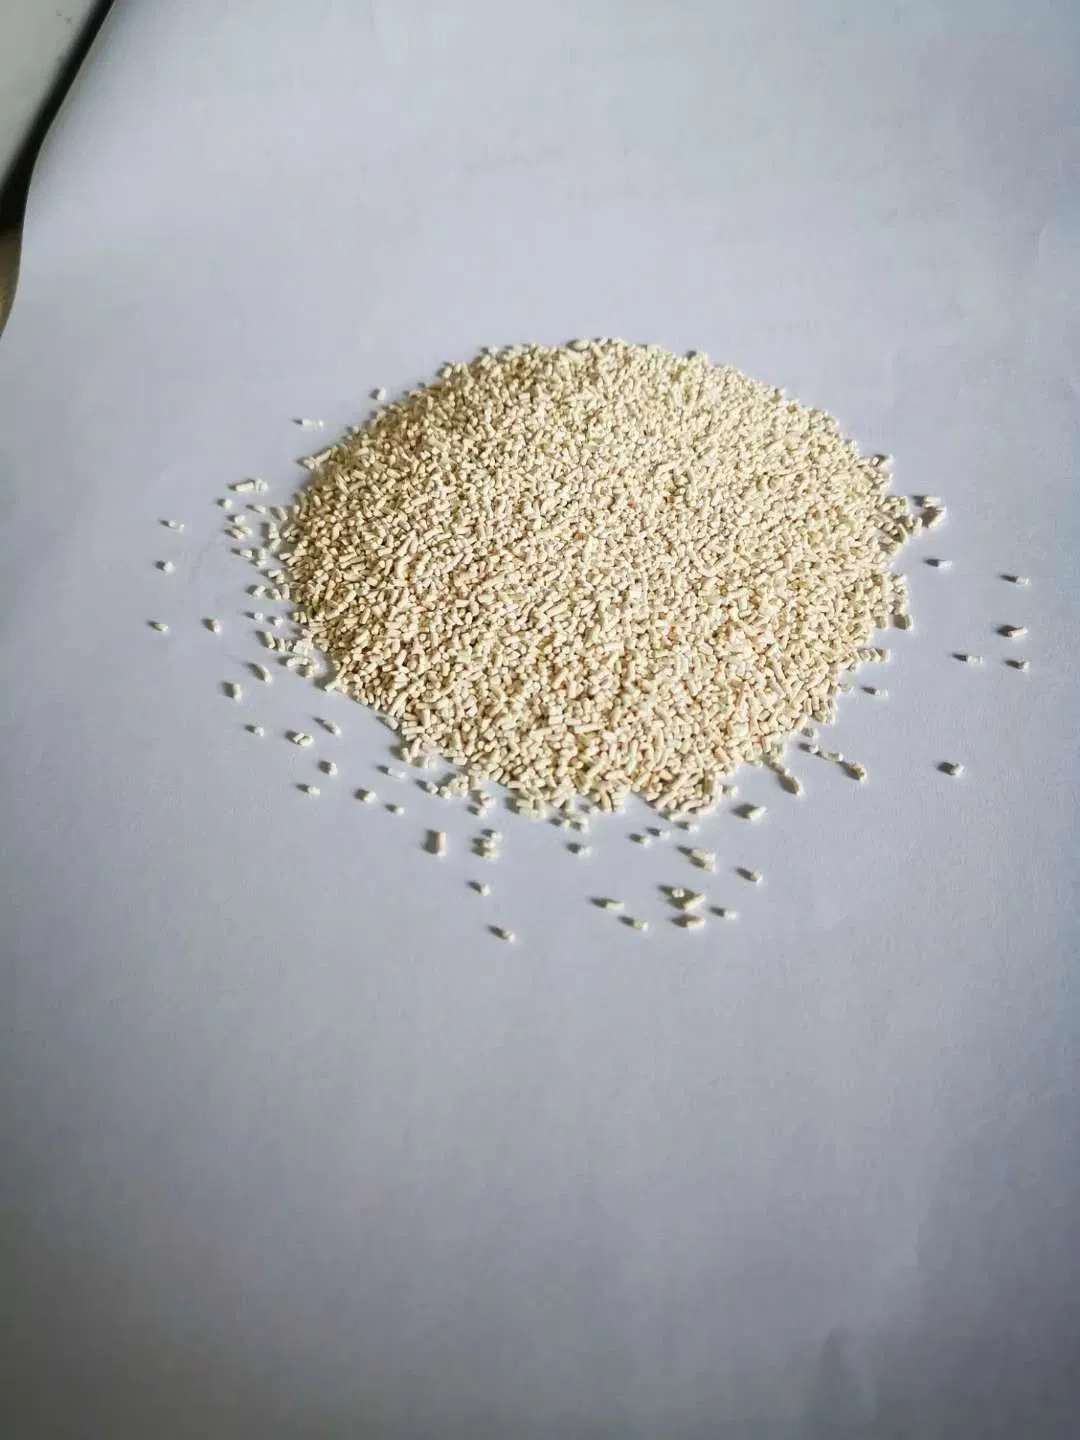 Ruigreat Chemical Agrochemicals Herbicide Pesticide for Thifensulfuron-Methy 25%Wdg